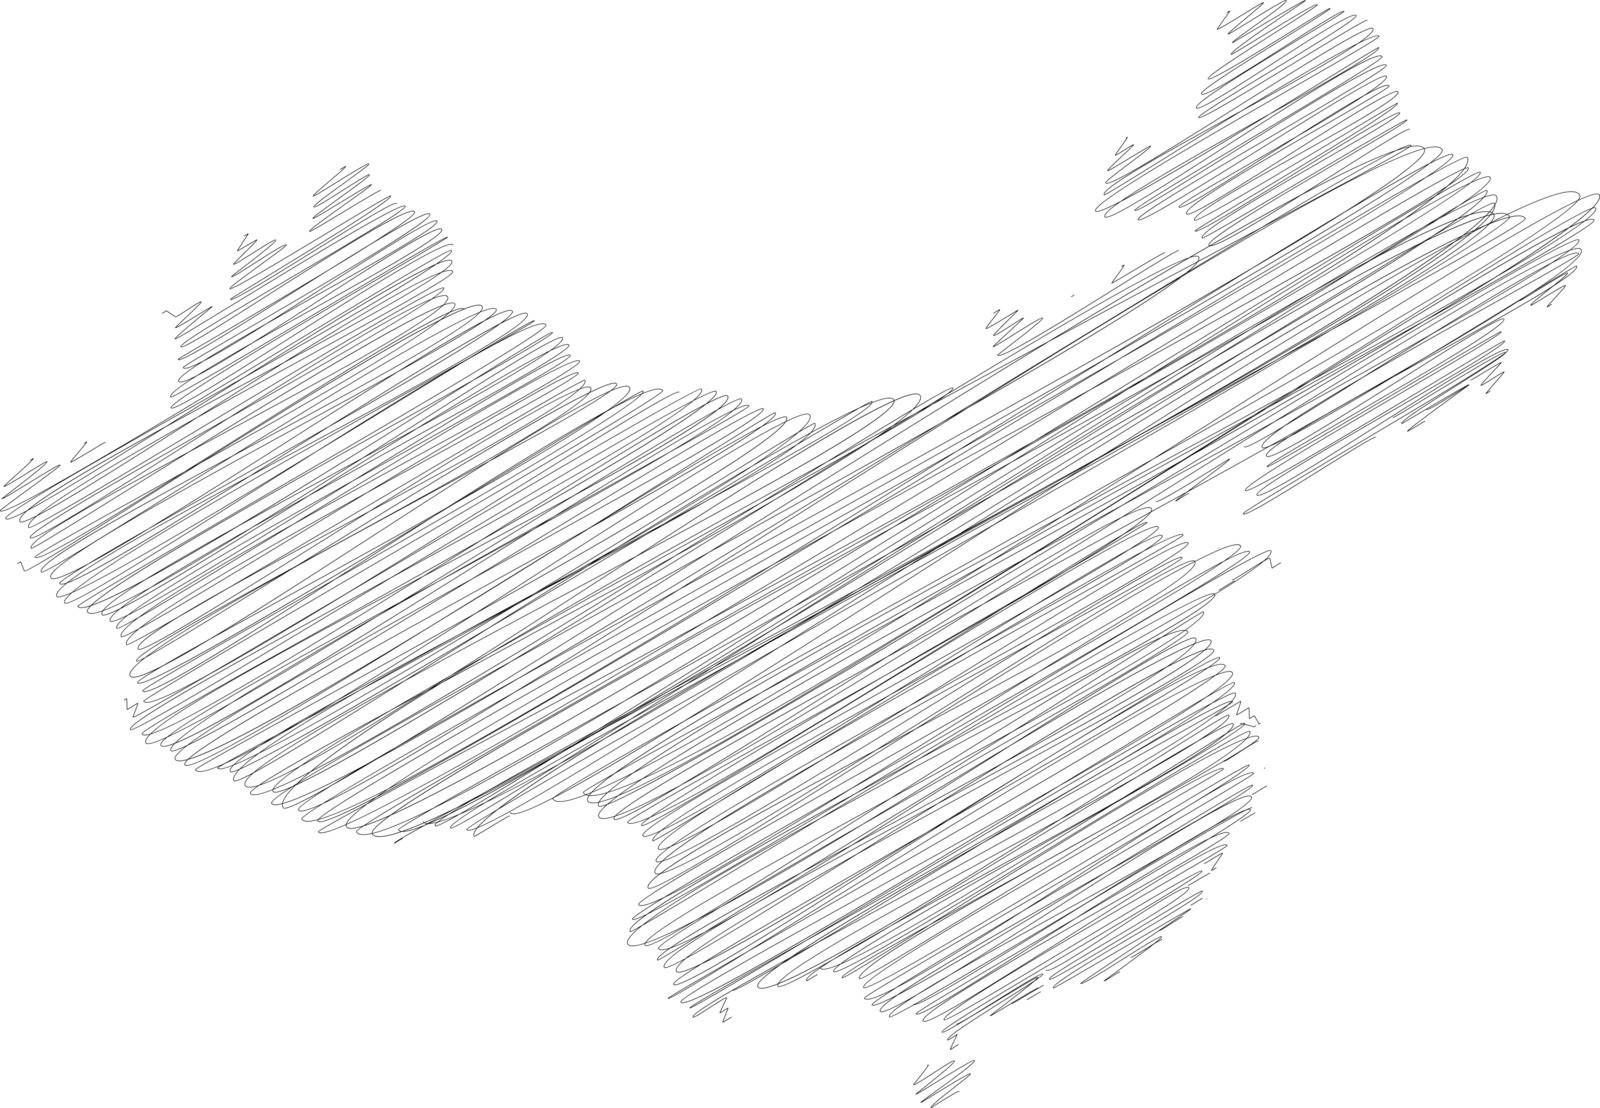 China - pencil scribble sketch silhouette map of country area with dropped shadow. Simple flat vector illustration.